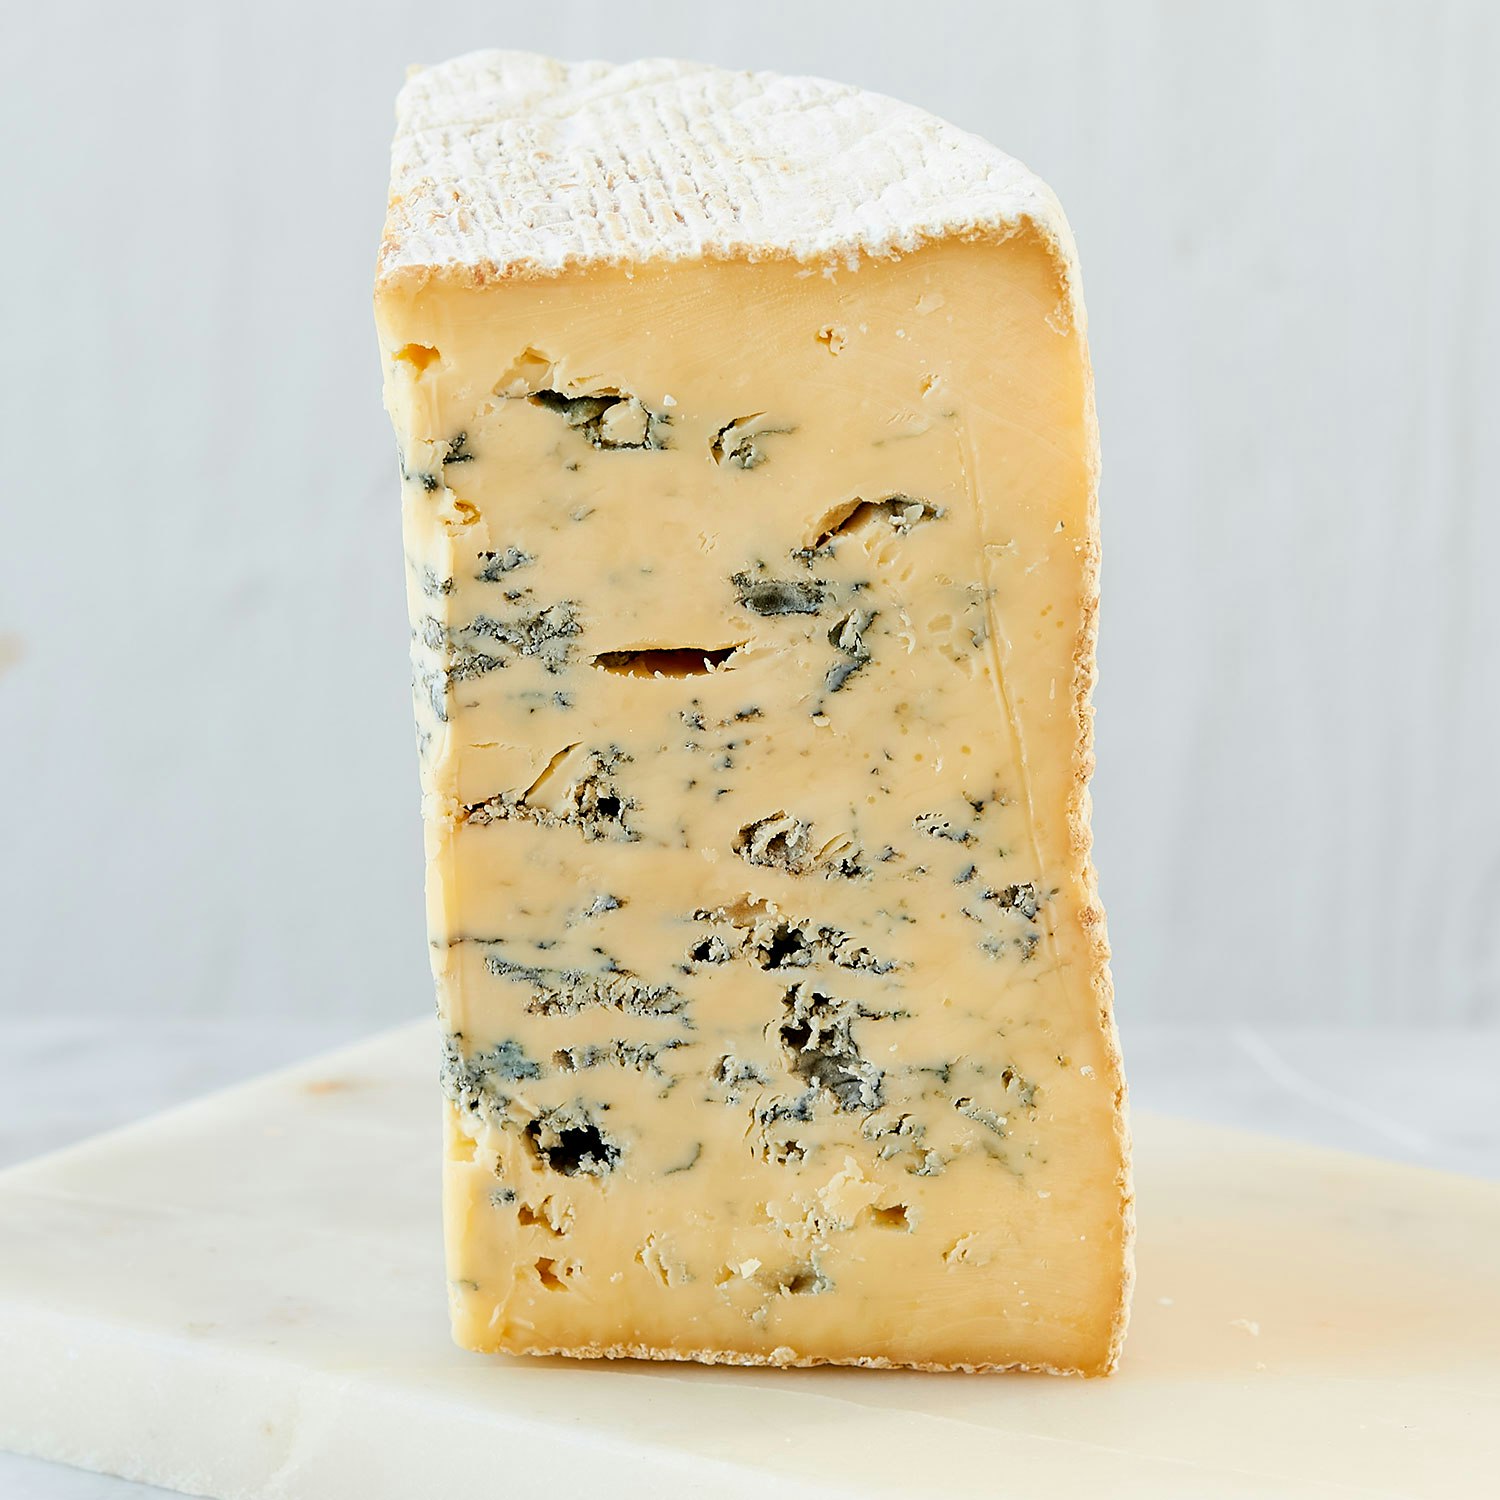 vonTrapp-Farmstead-Mad-River-Blue-cheese-112653-02